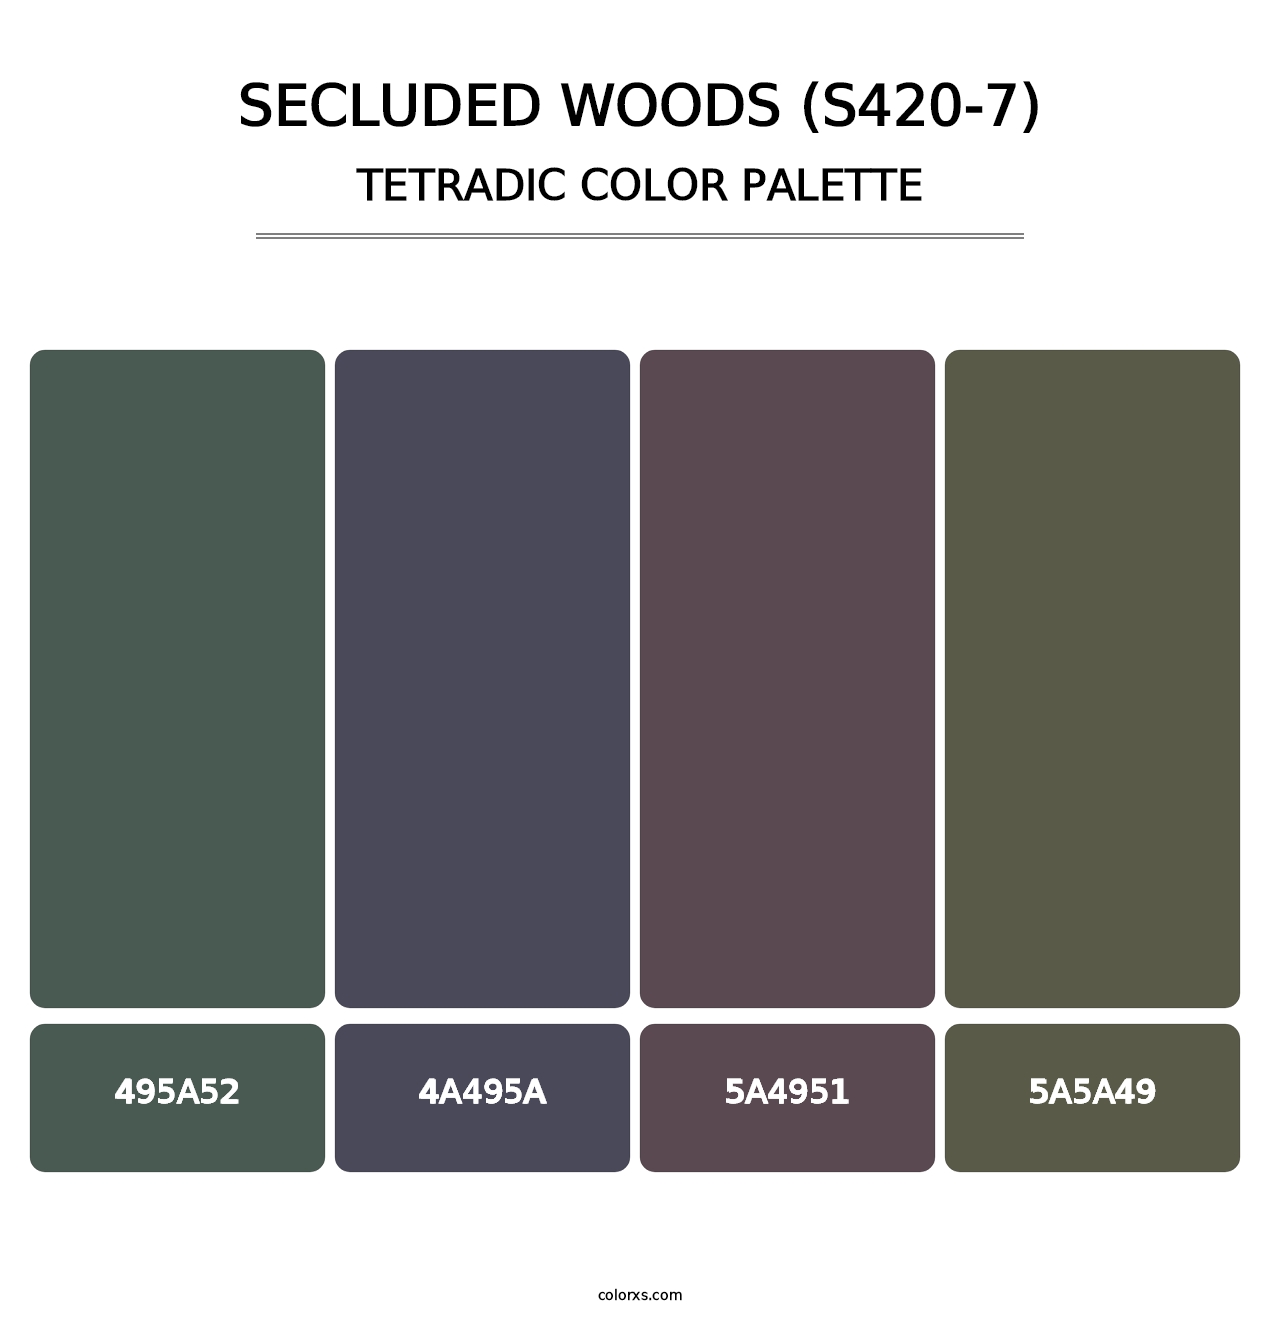 Secluded Woods (S420-7) - Tetradic Color Palette